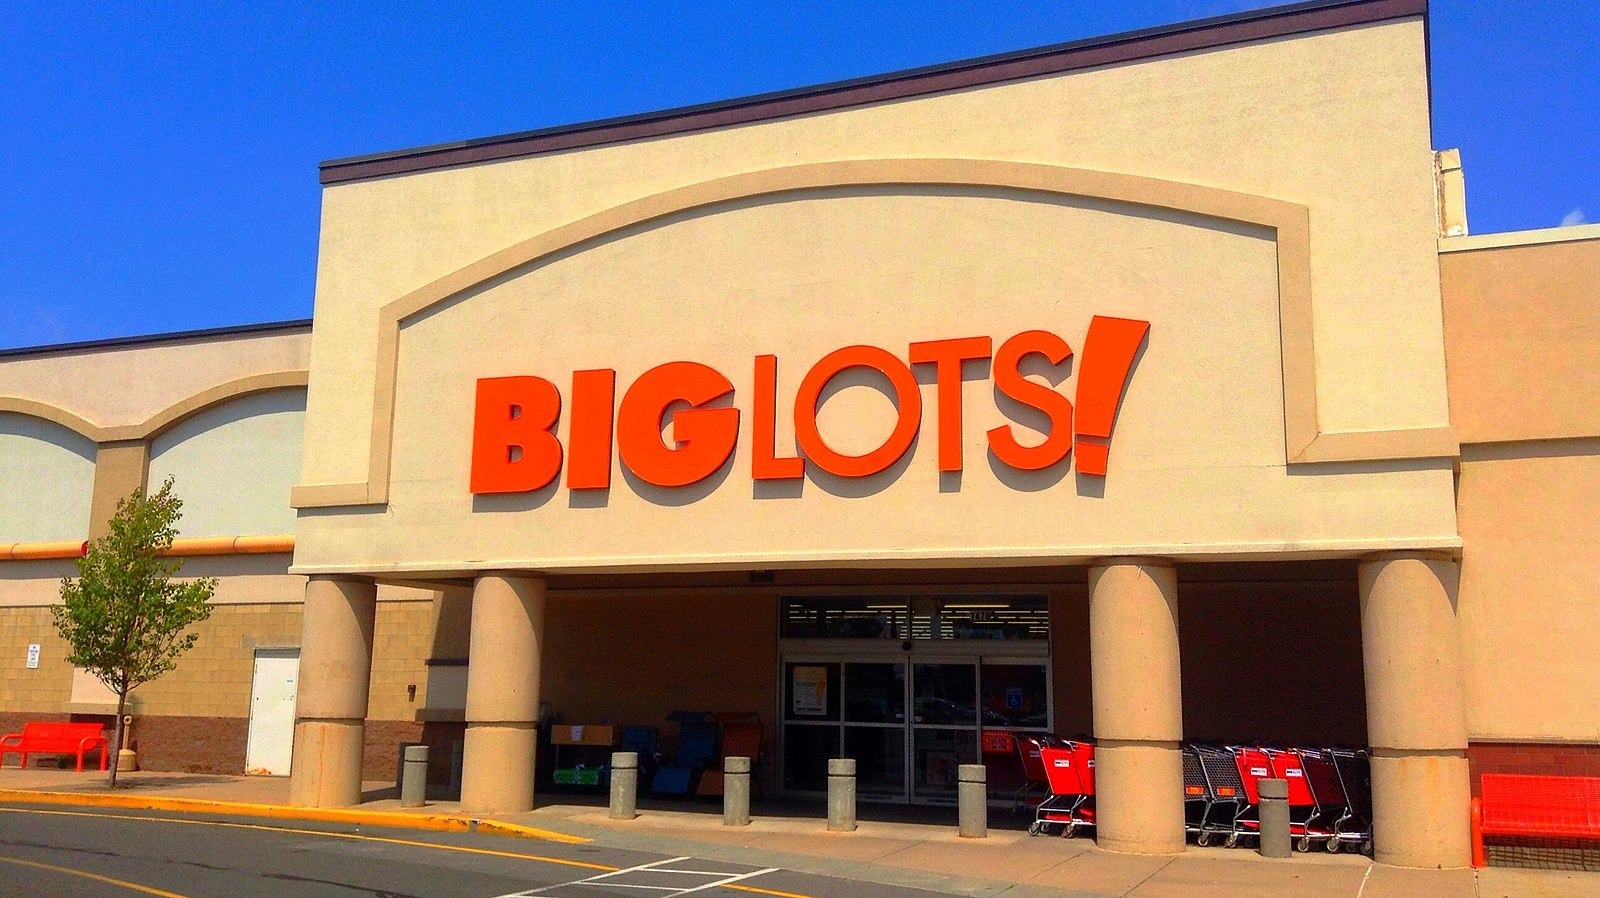 https://www.mashed.com/img/gallery/what-you-need-to-know-before-buying-groceries-at-big-lots/l-intro-1686077338.jpg